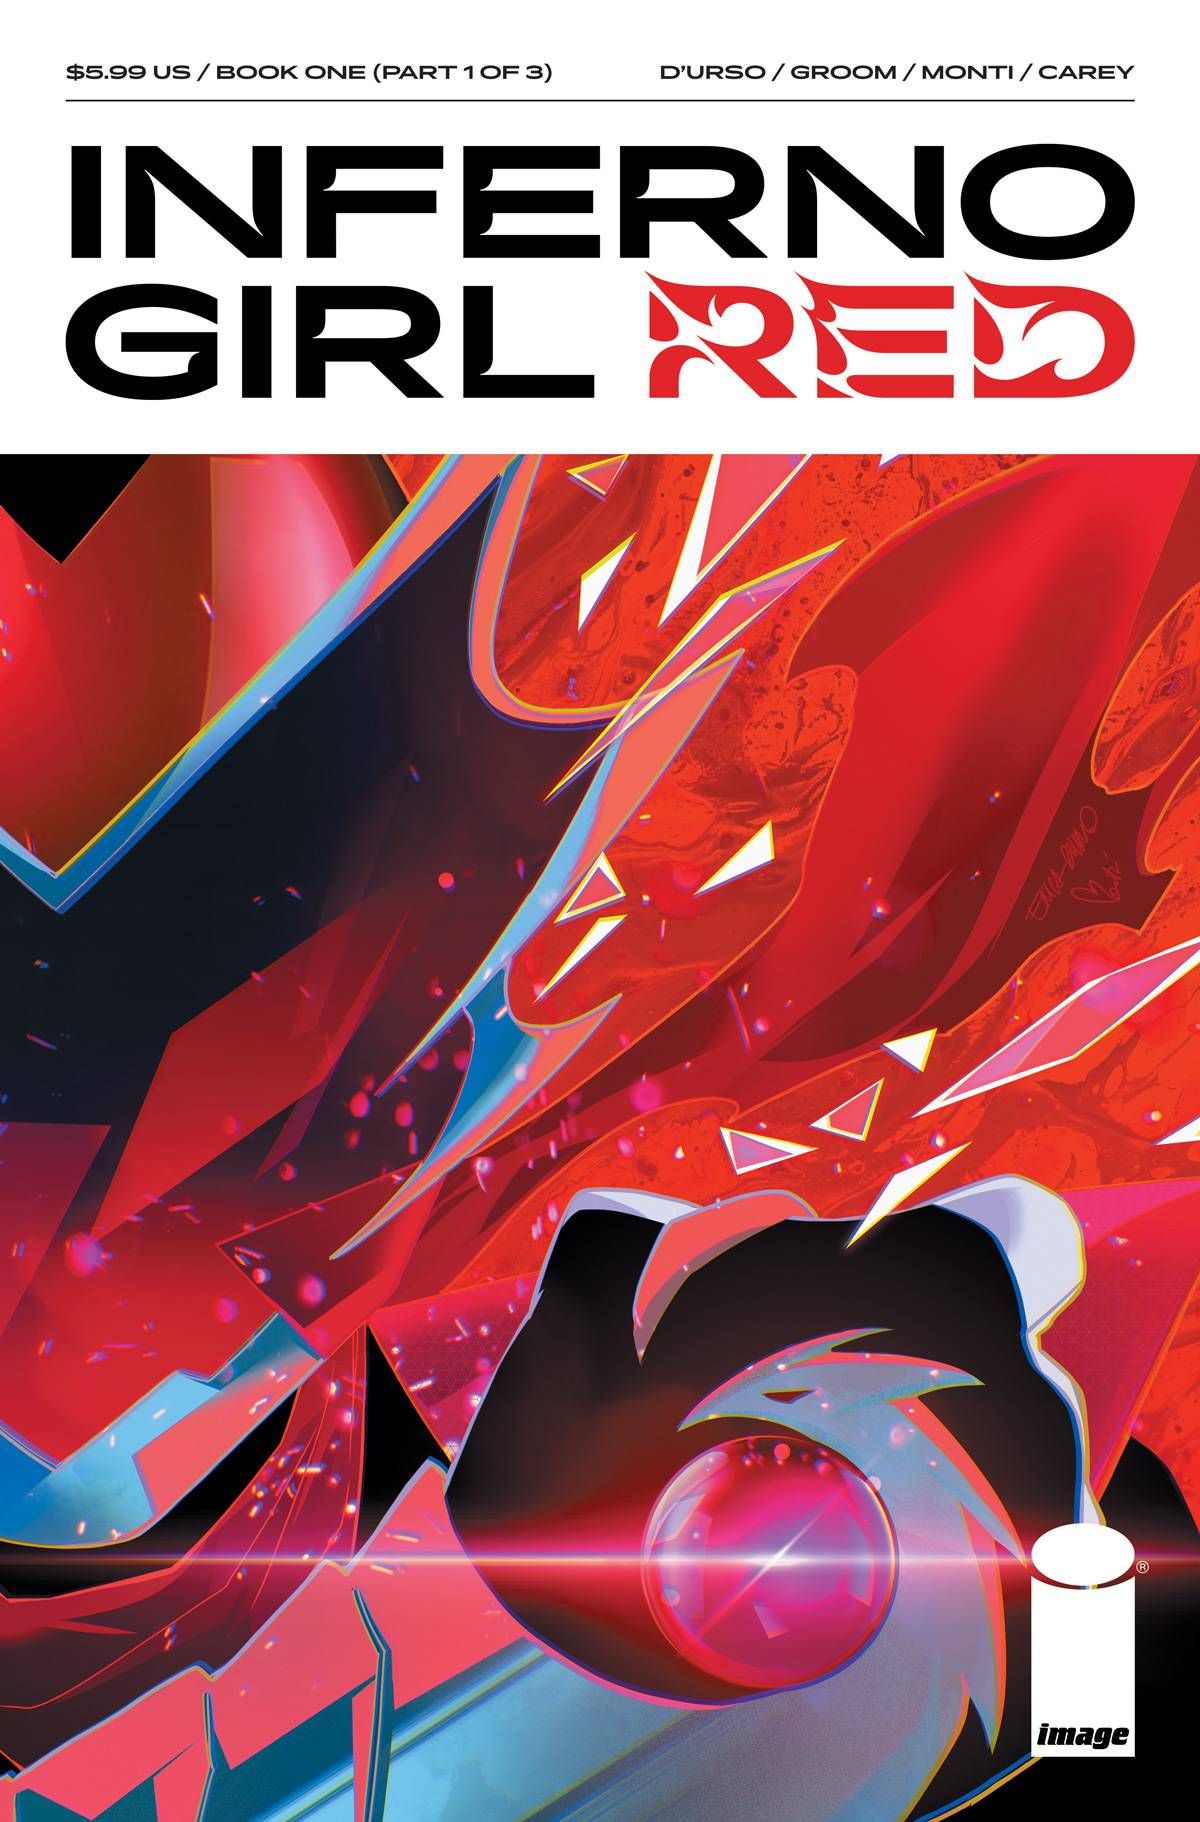 Inferno Girl Red - Book One Comic